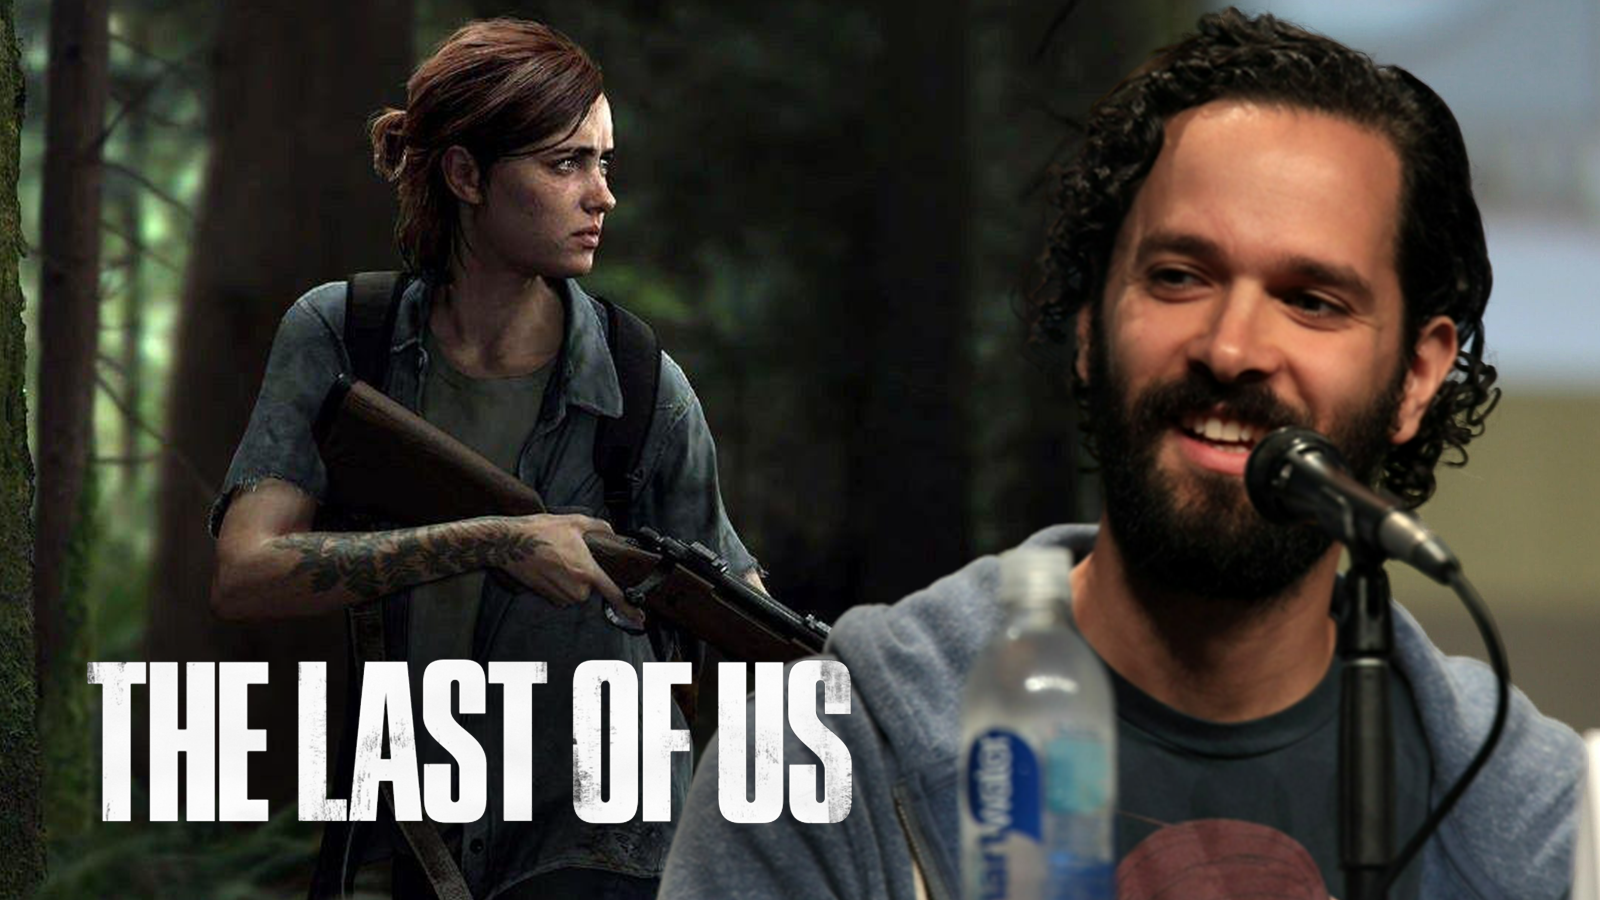 The Last of Us' Neil Druckmann Confirms He's Writing, Directing